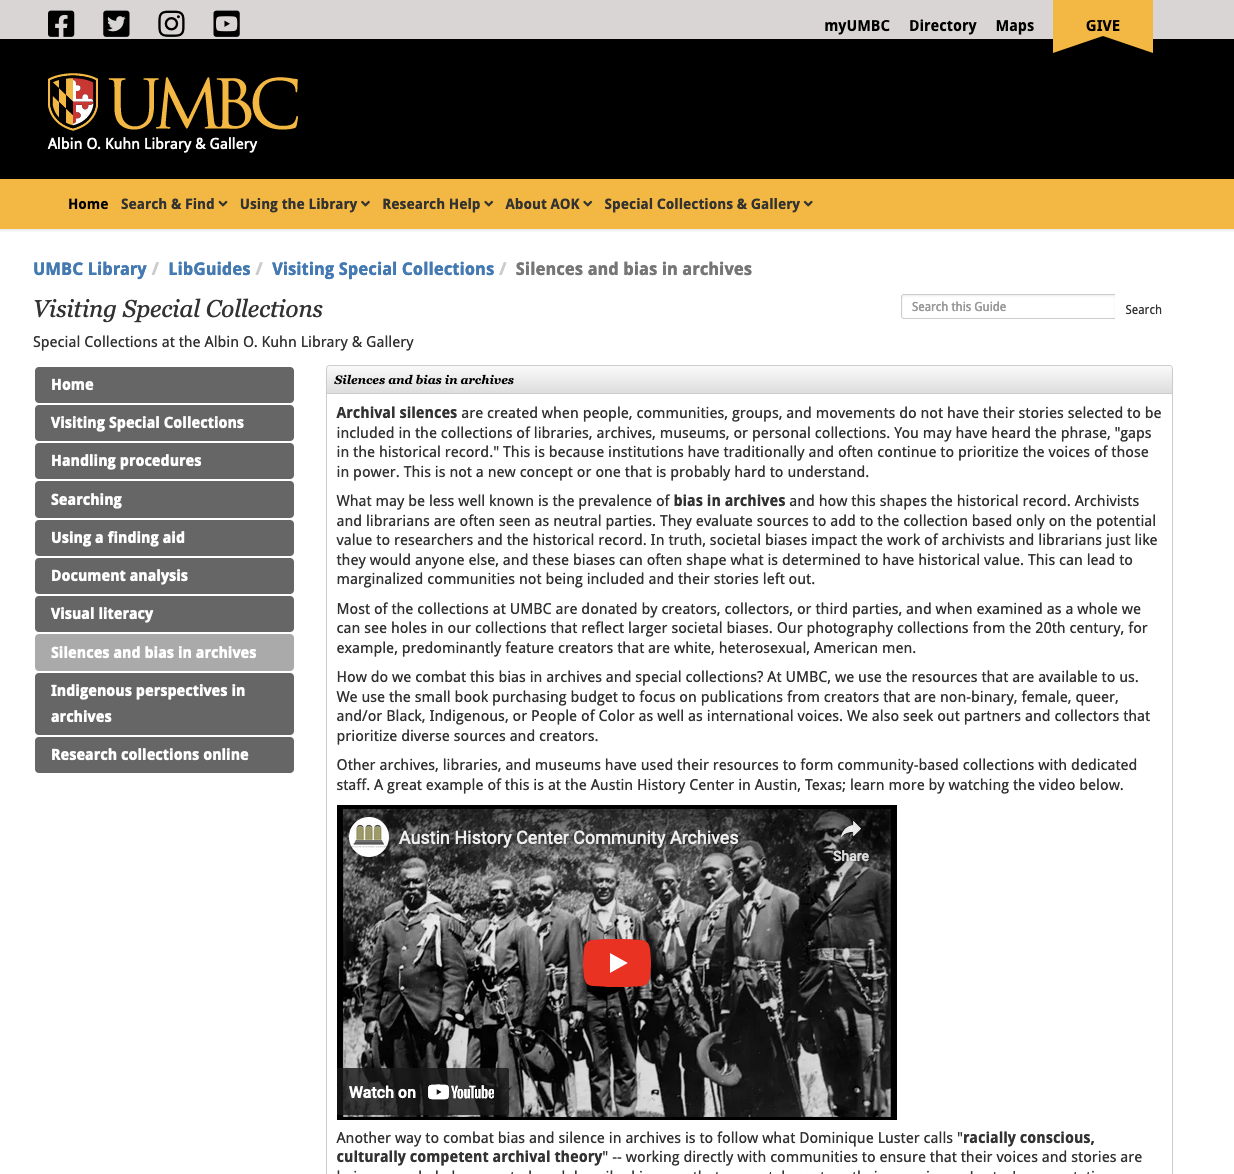 University of Maryland, Baltimore County Albin O. Kuhn Library & Gallery Special Collections page on Archival silences with embedded video visible.